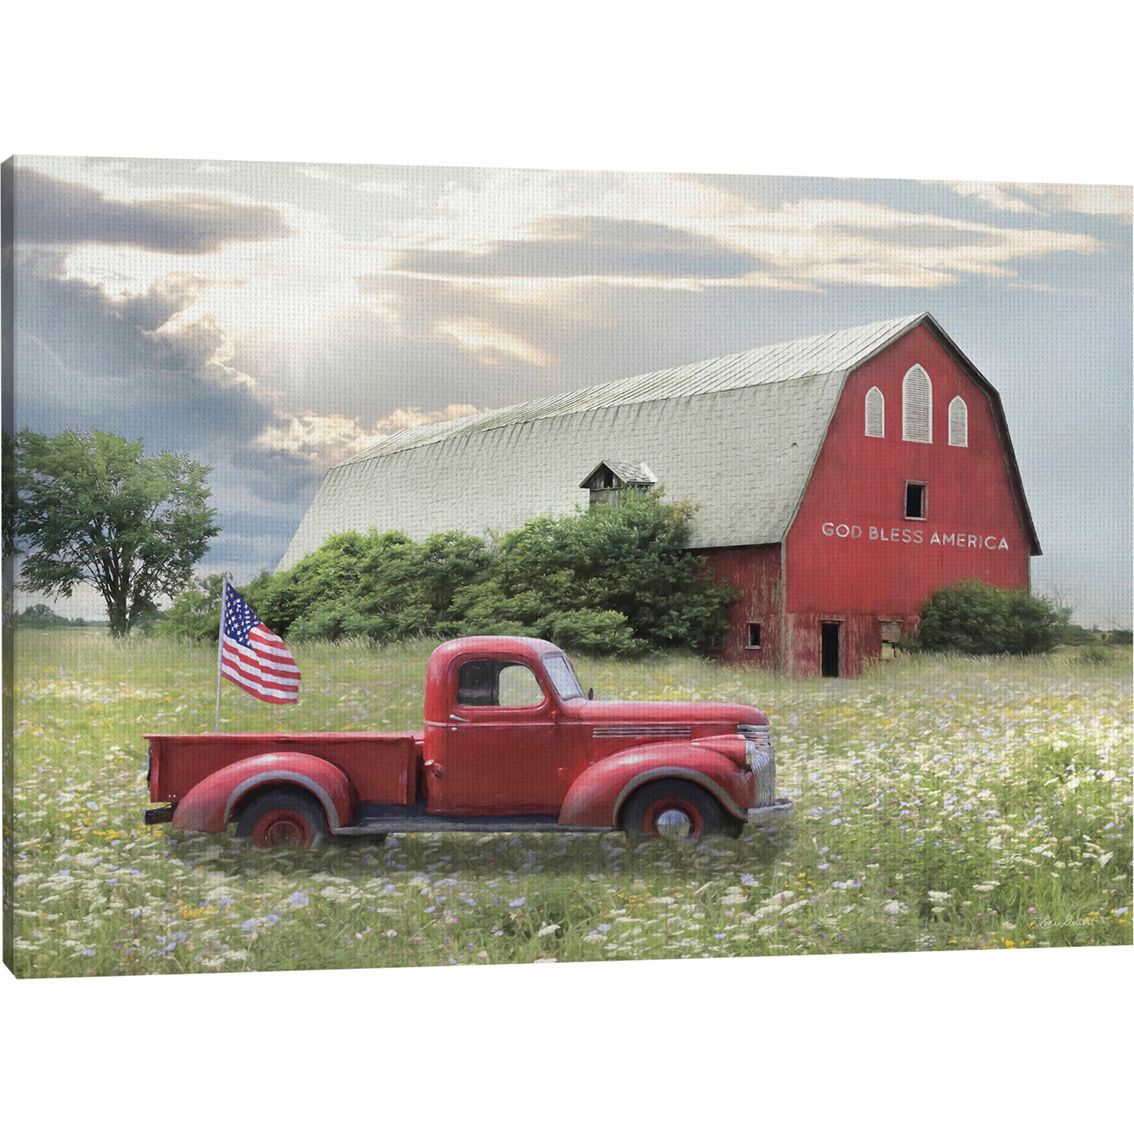 Inkstry God Bless America Giclee Gallery Wrapped Canvas Print - Image 2 of 3